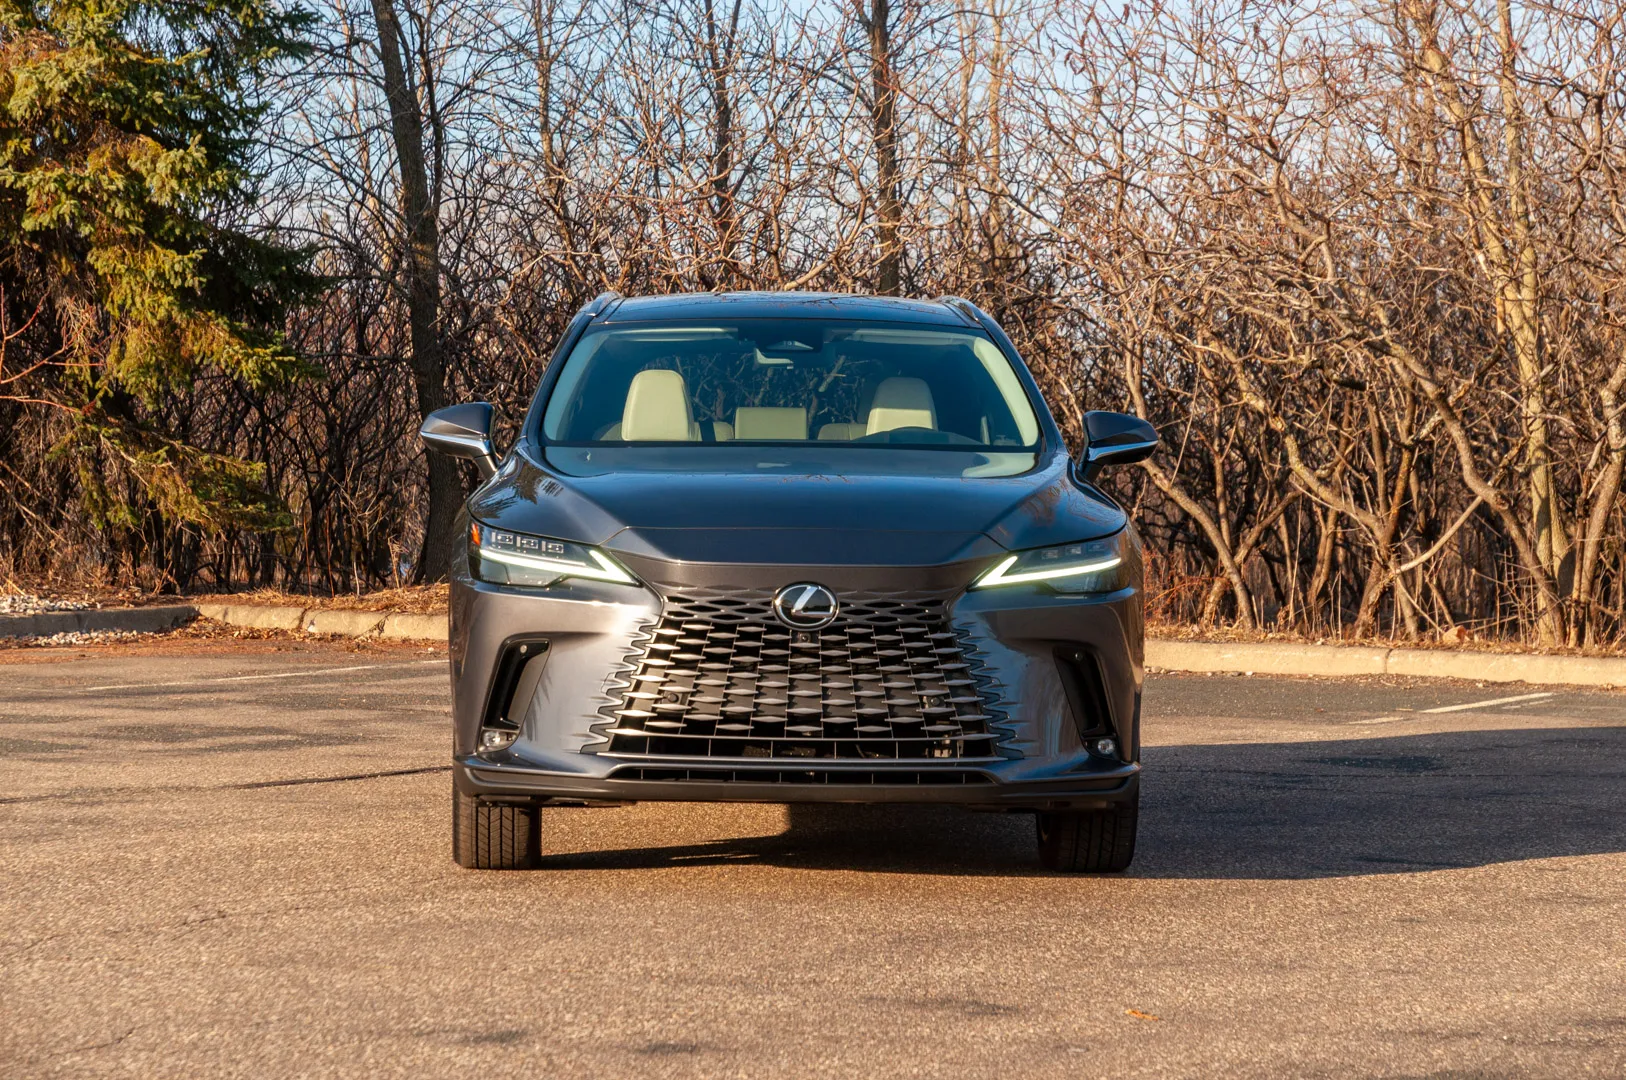 Lexus RX 450h+ review, Toyota PHEV route smarts, Biden eases rules: Today’s Car News